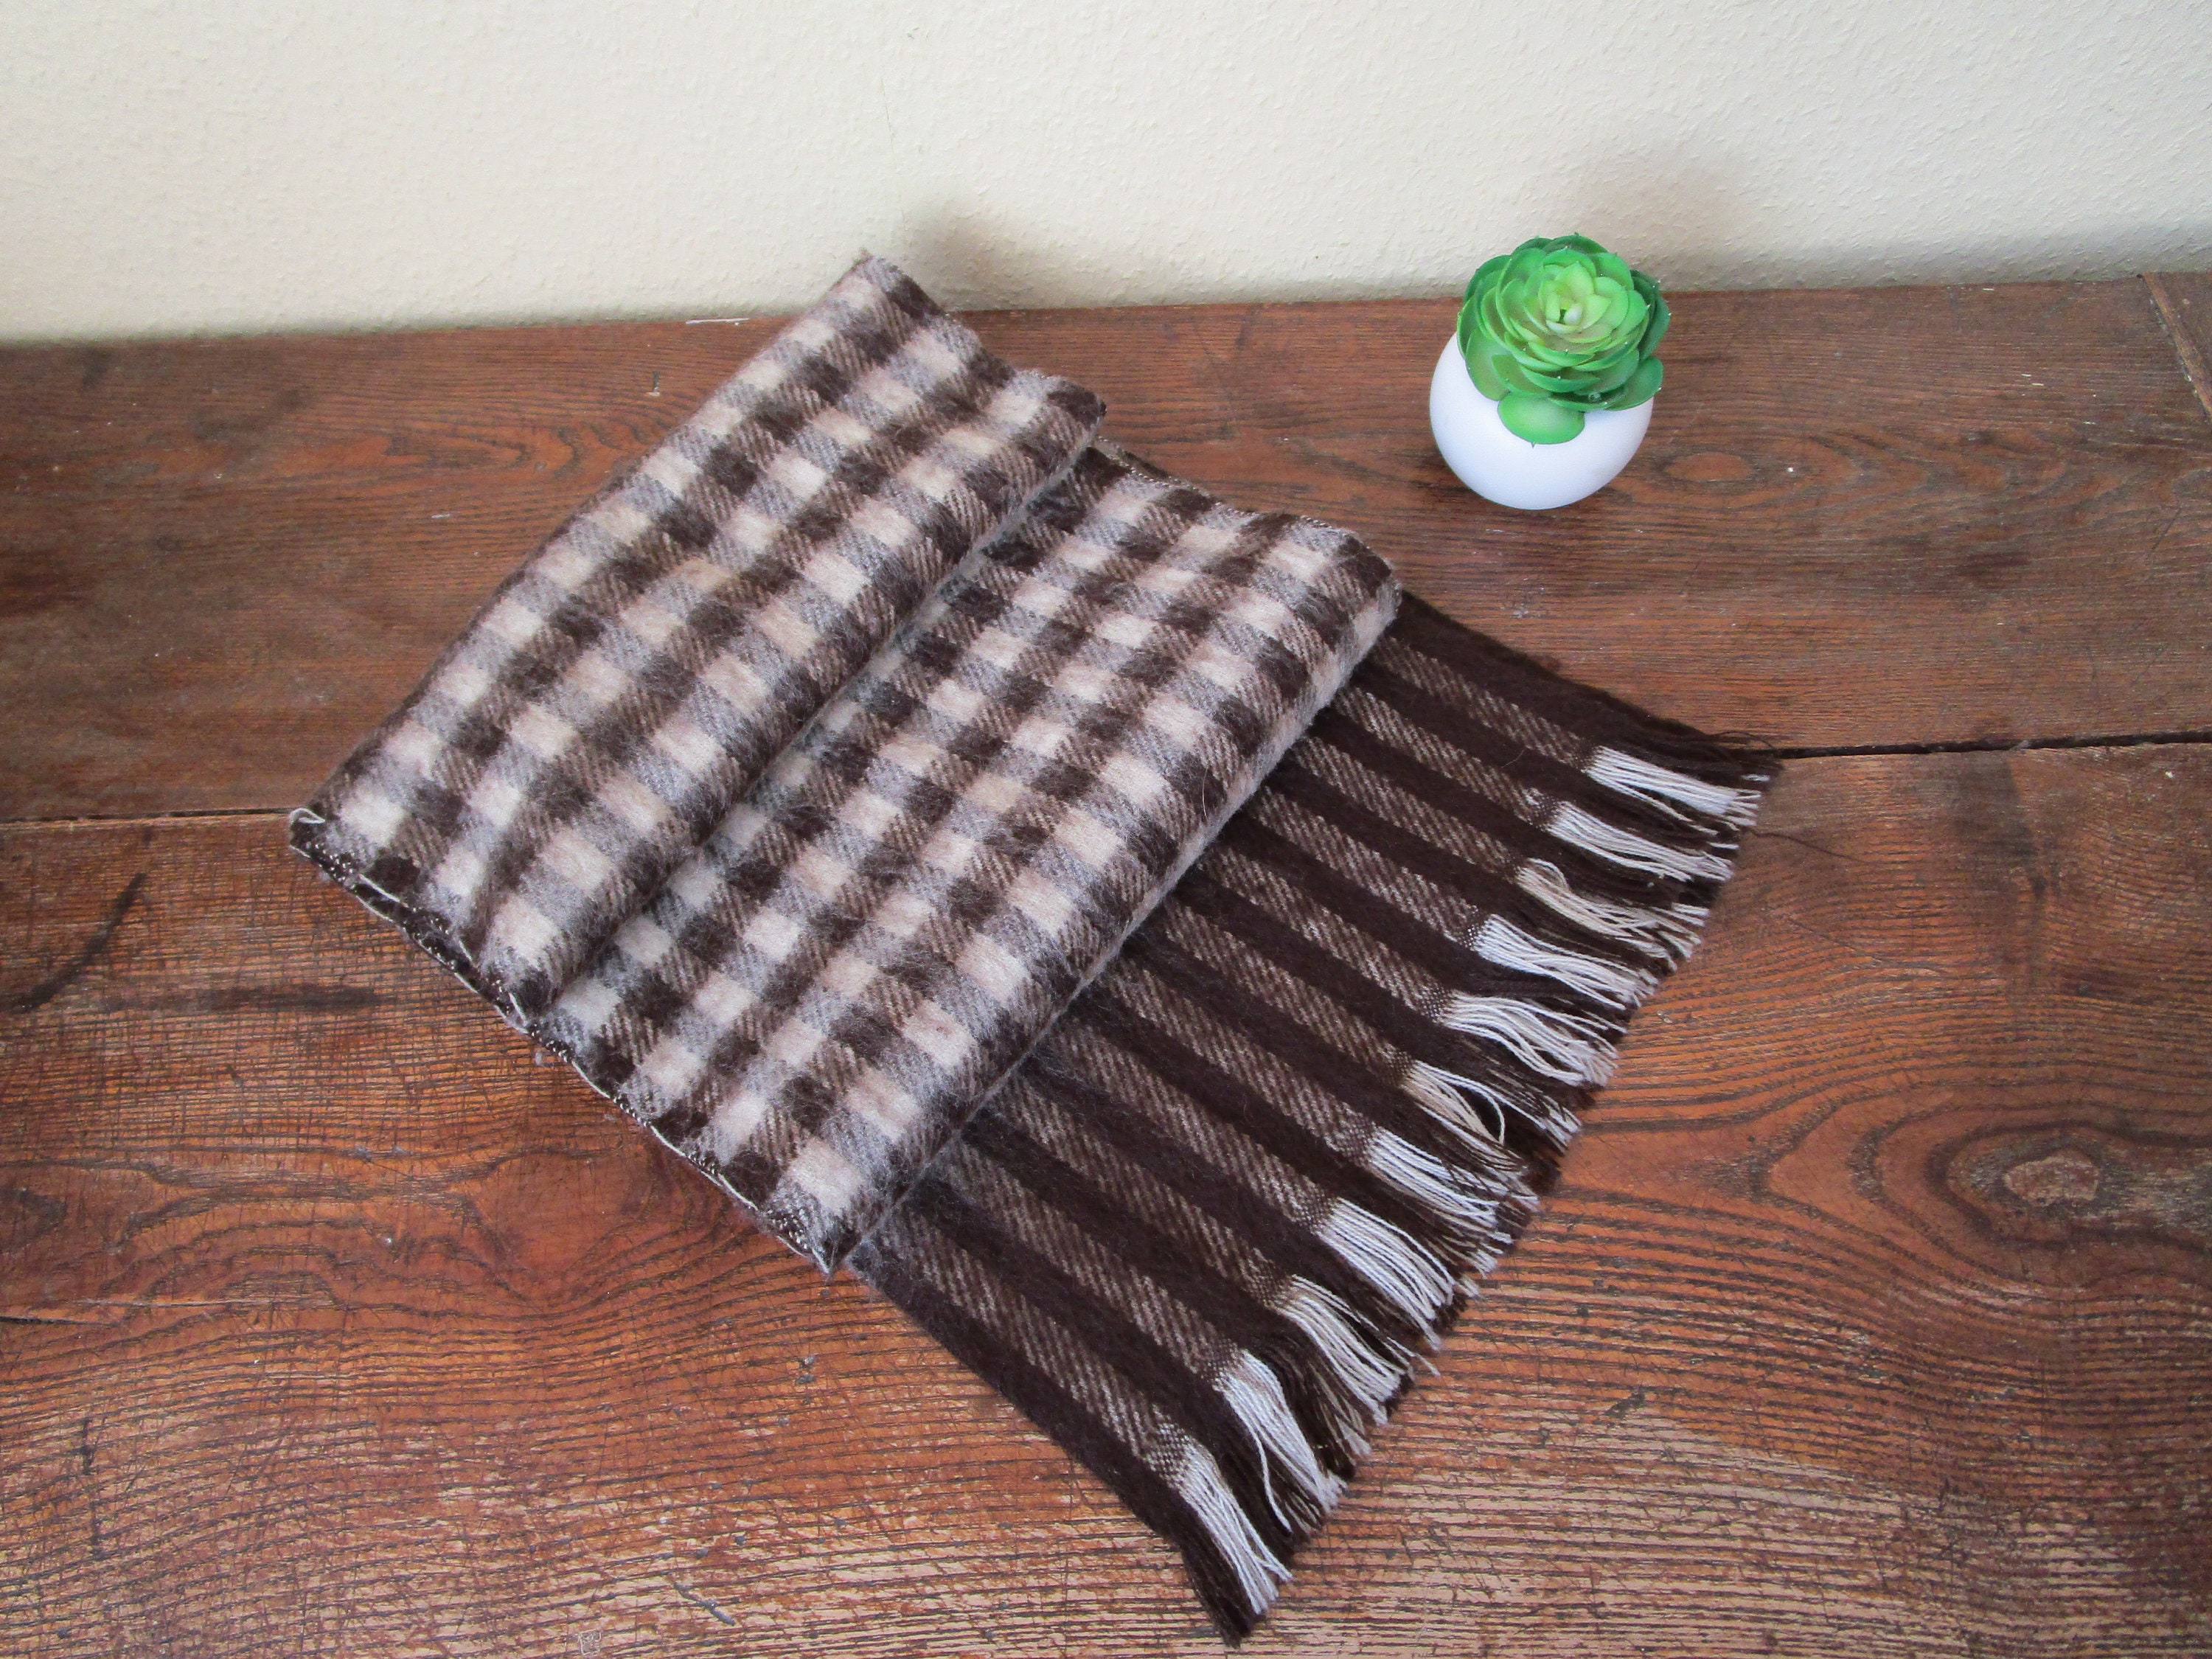 Classic Brown Blue Plaid Style Winter Scarf Perfect Valentine's Day Gift  For Men